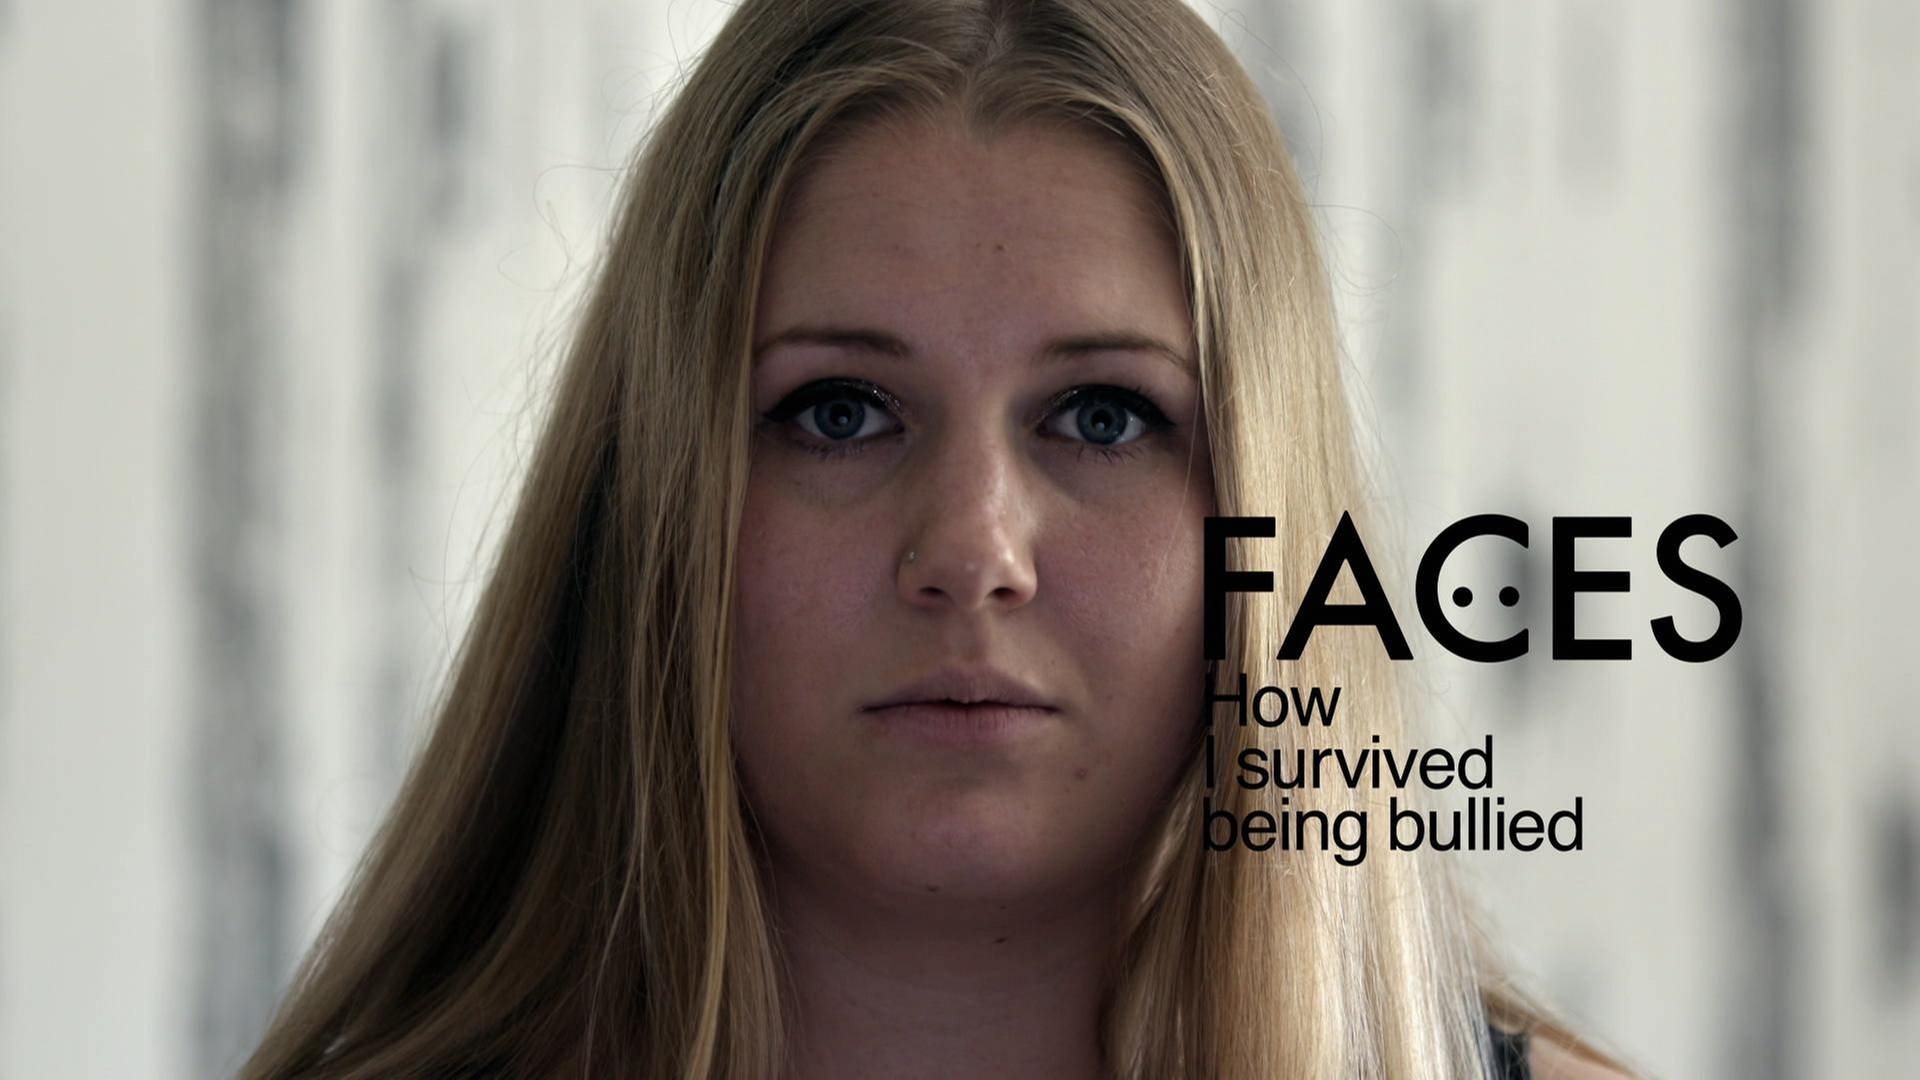 Lena (Deutschland) · Faces · How I survived being bullied